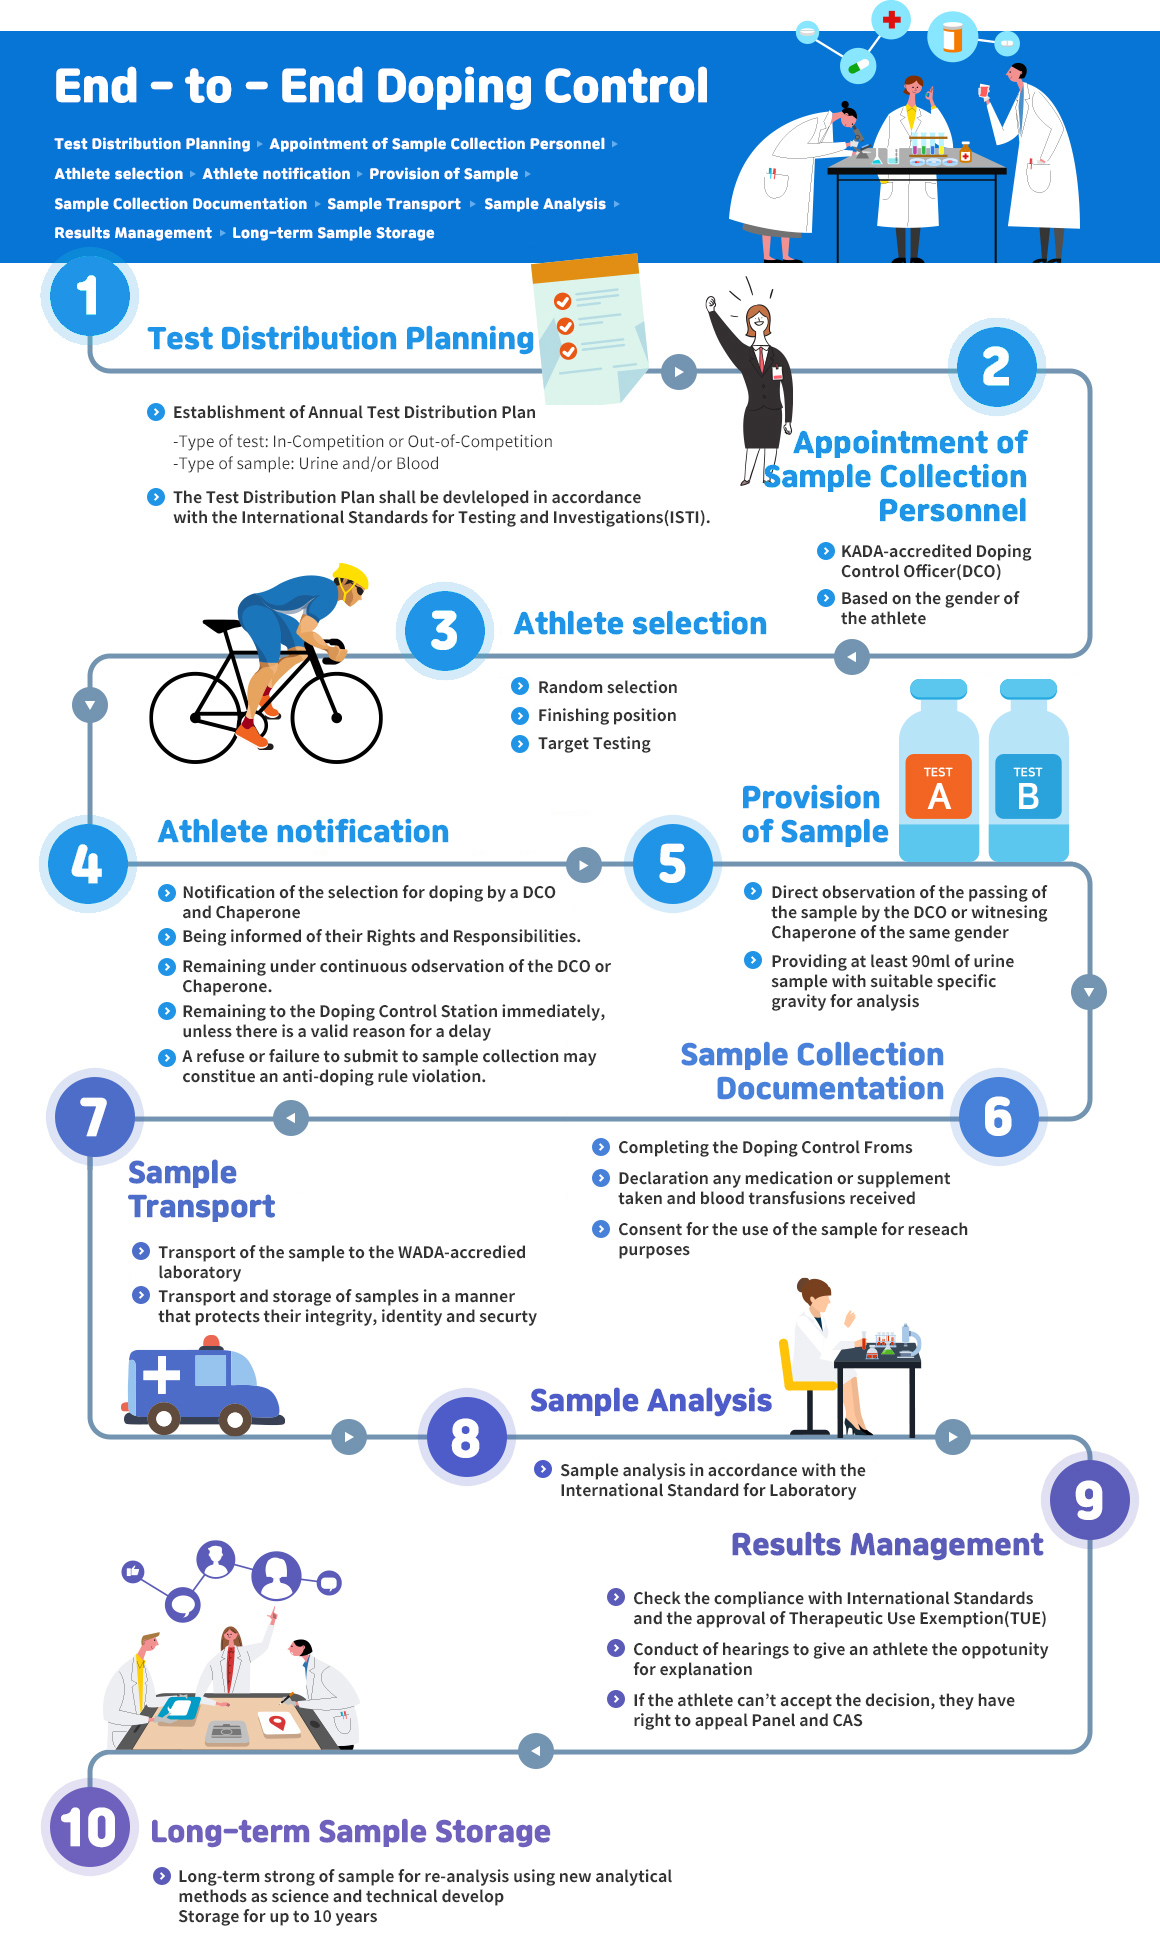 This is an image that shows all the procedures for doping test. Please see below for a detailed explanation.